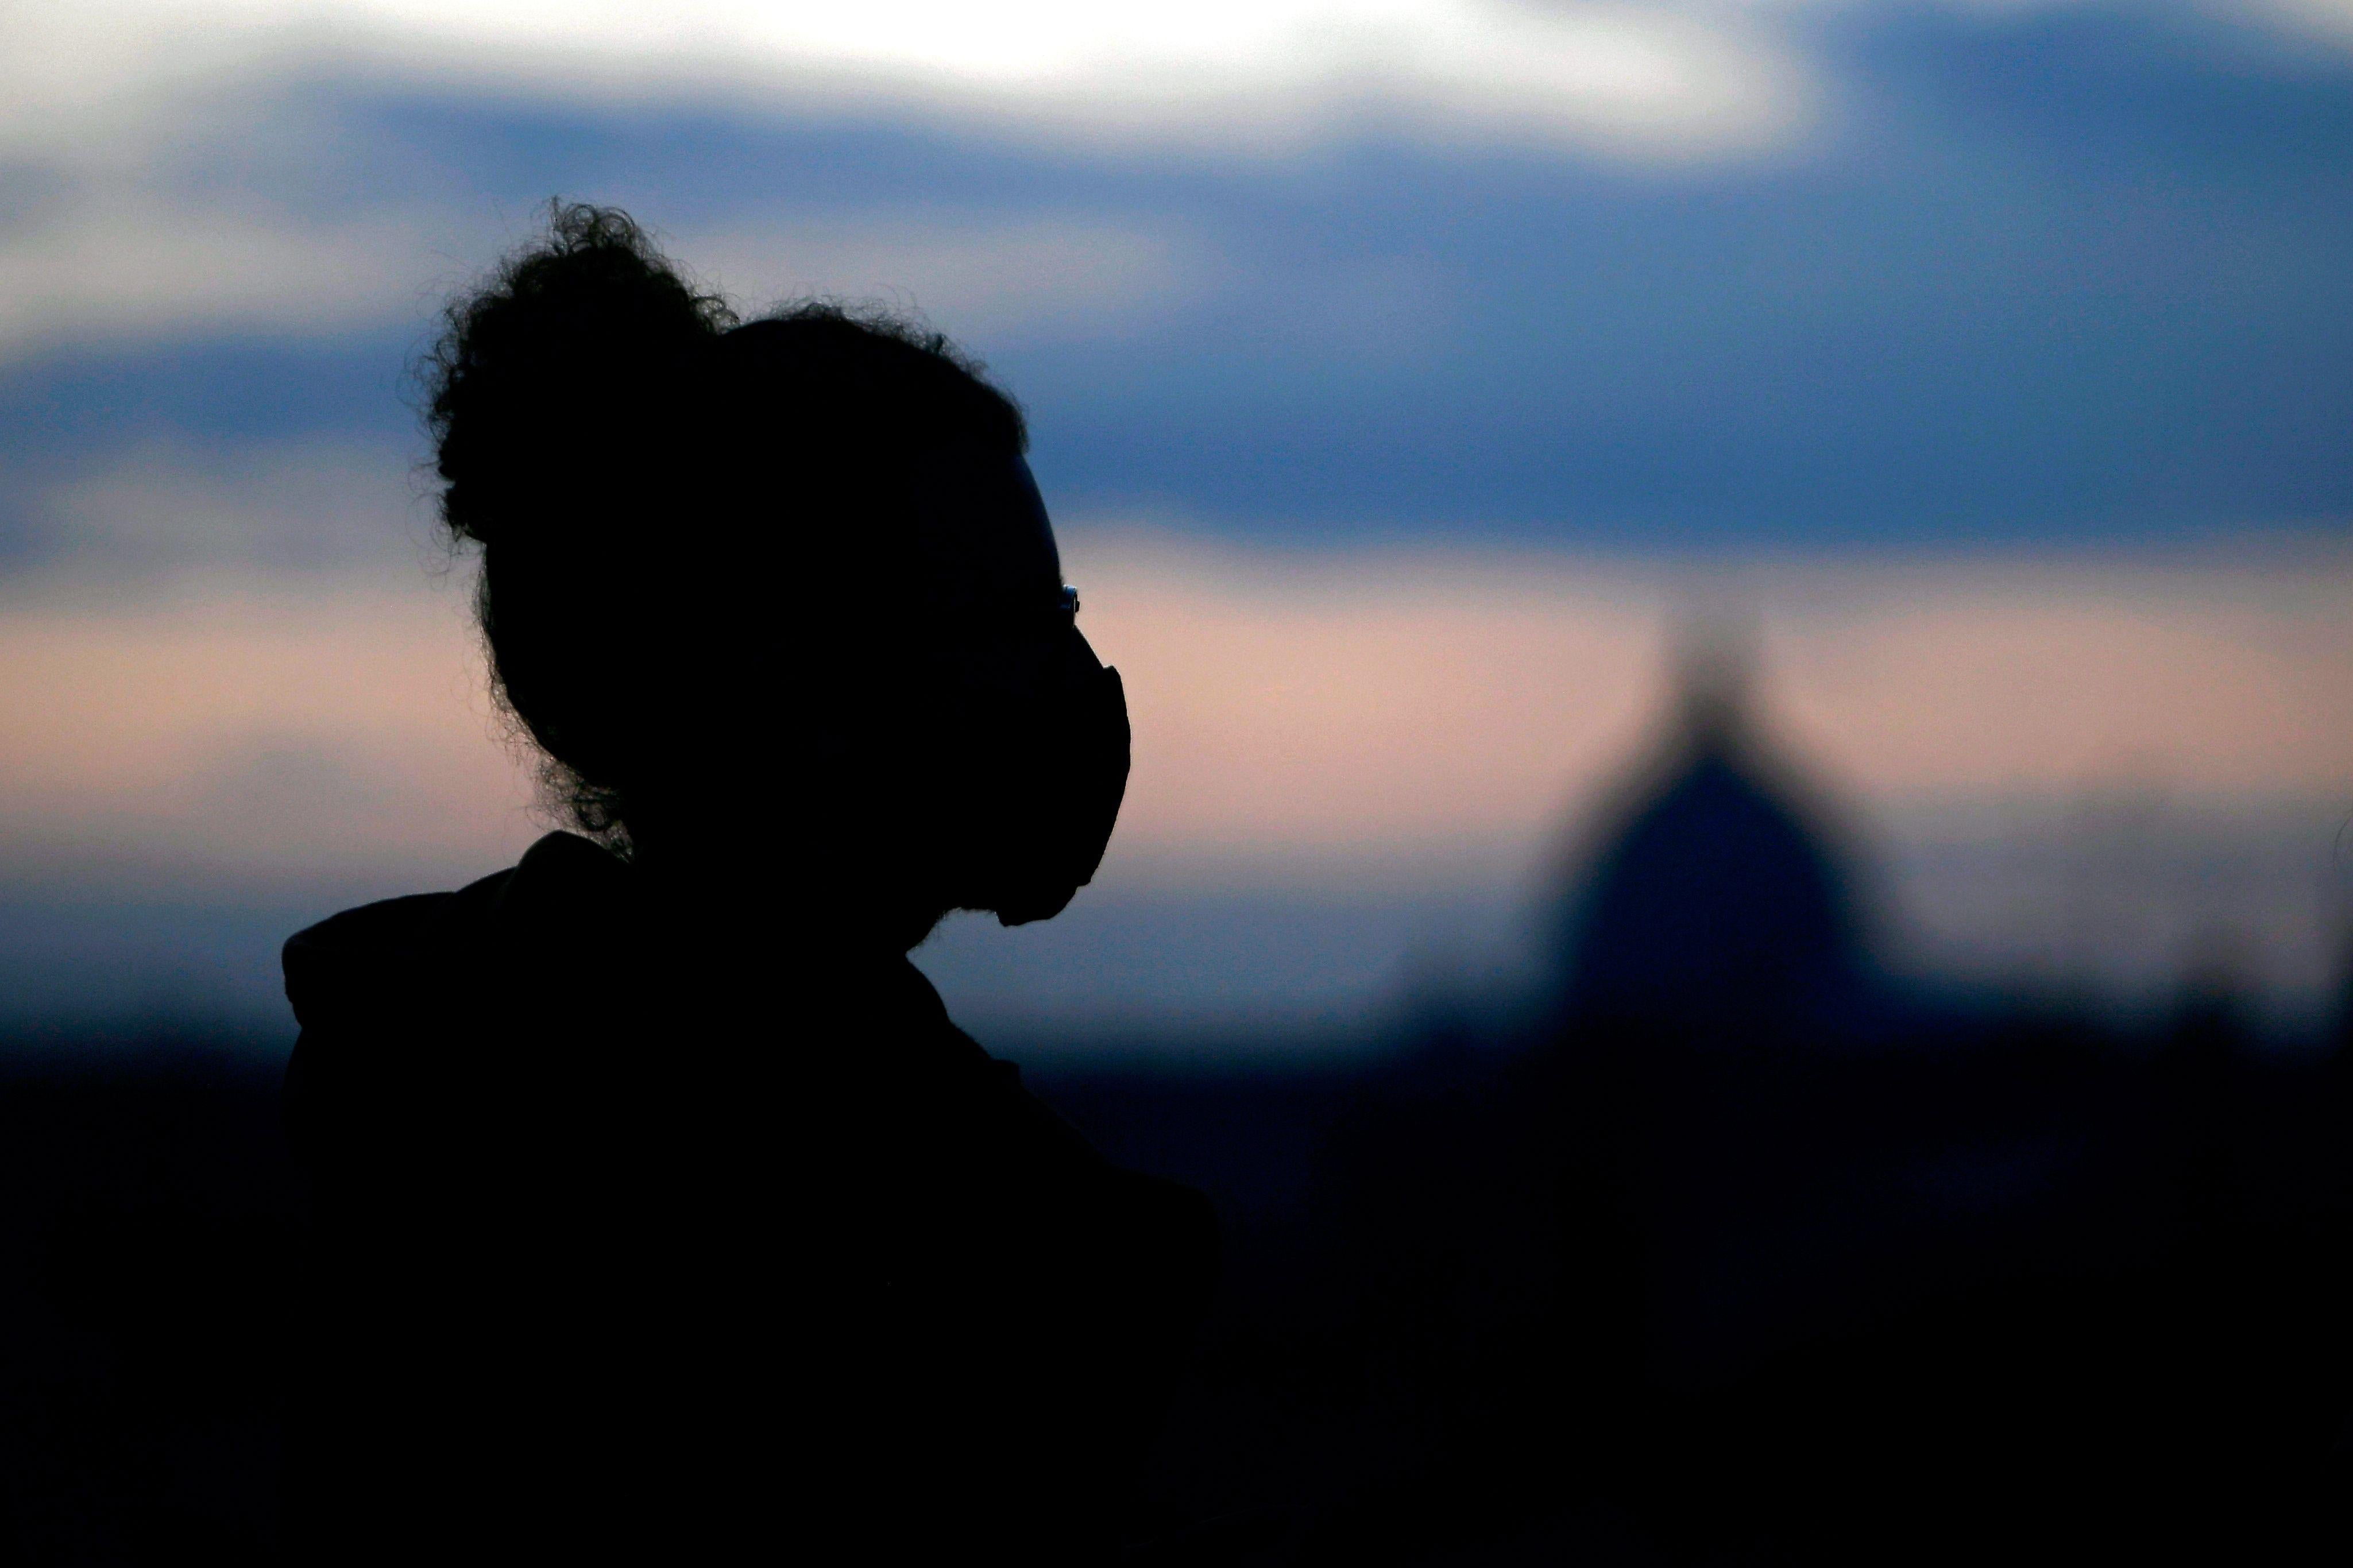 A person in a face mask at dusk